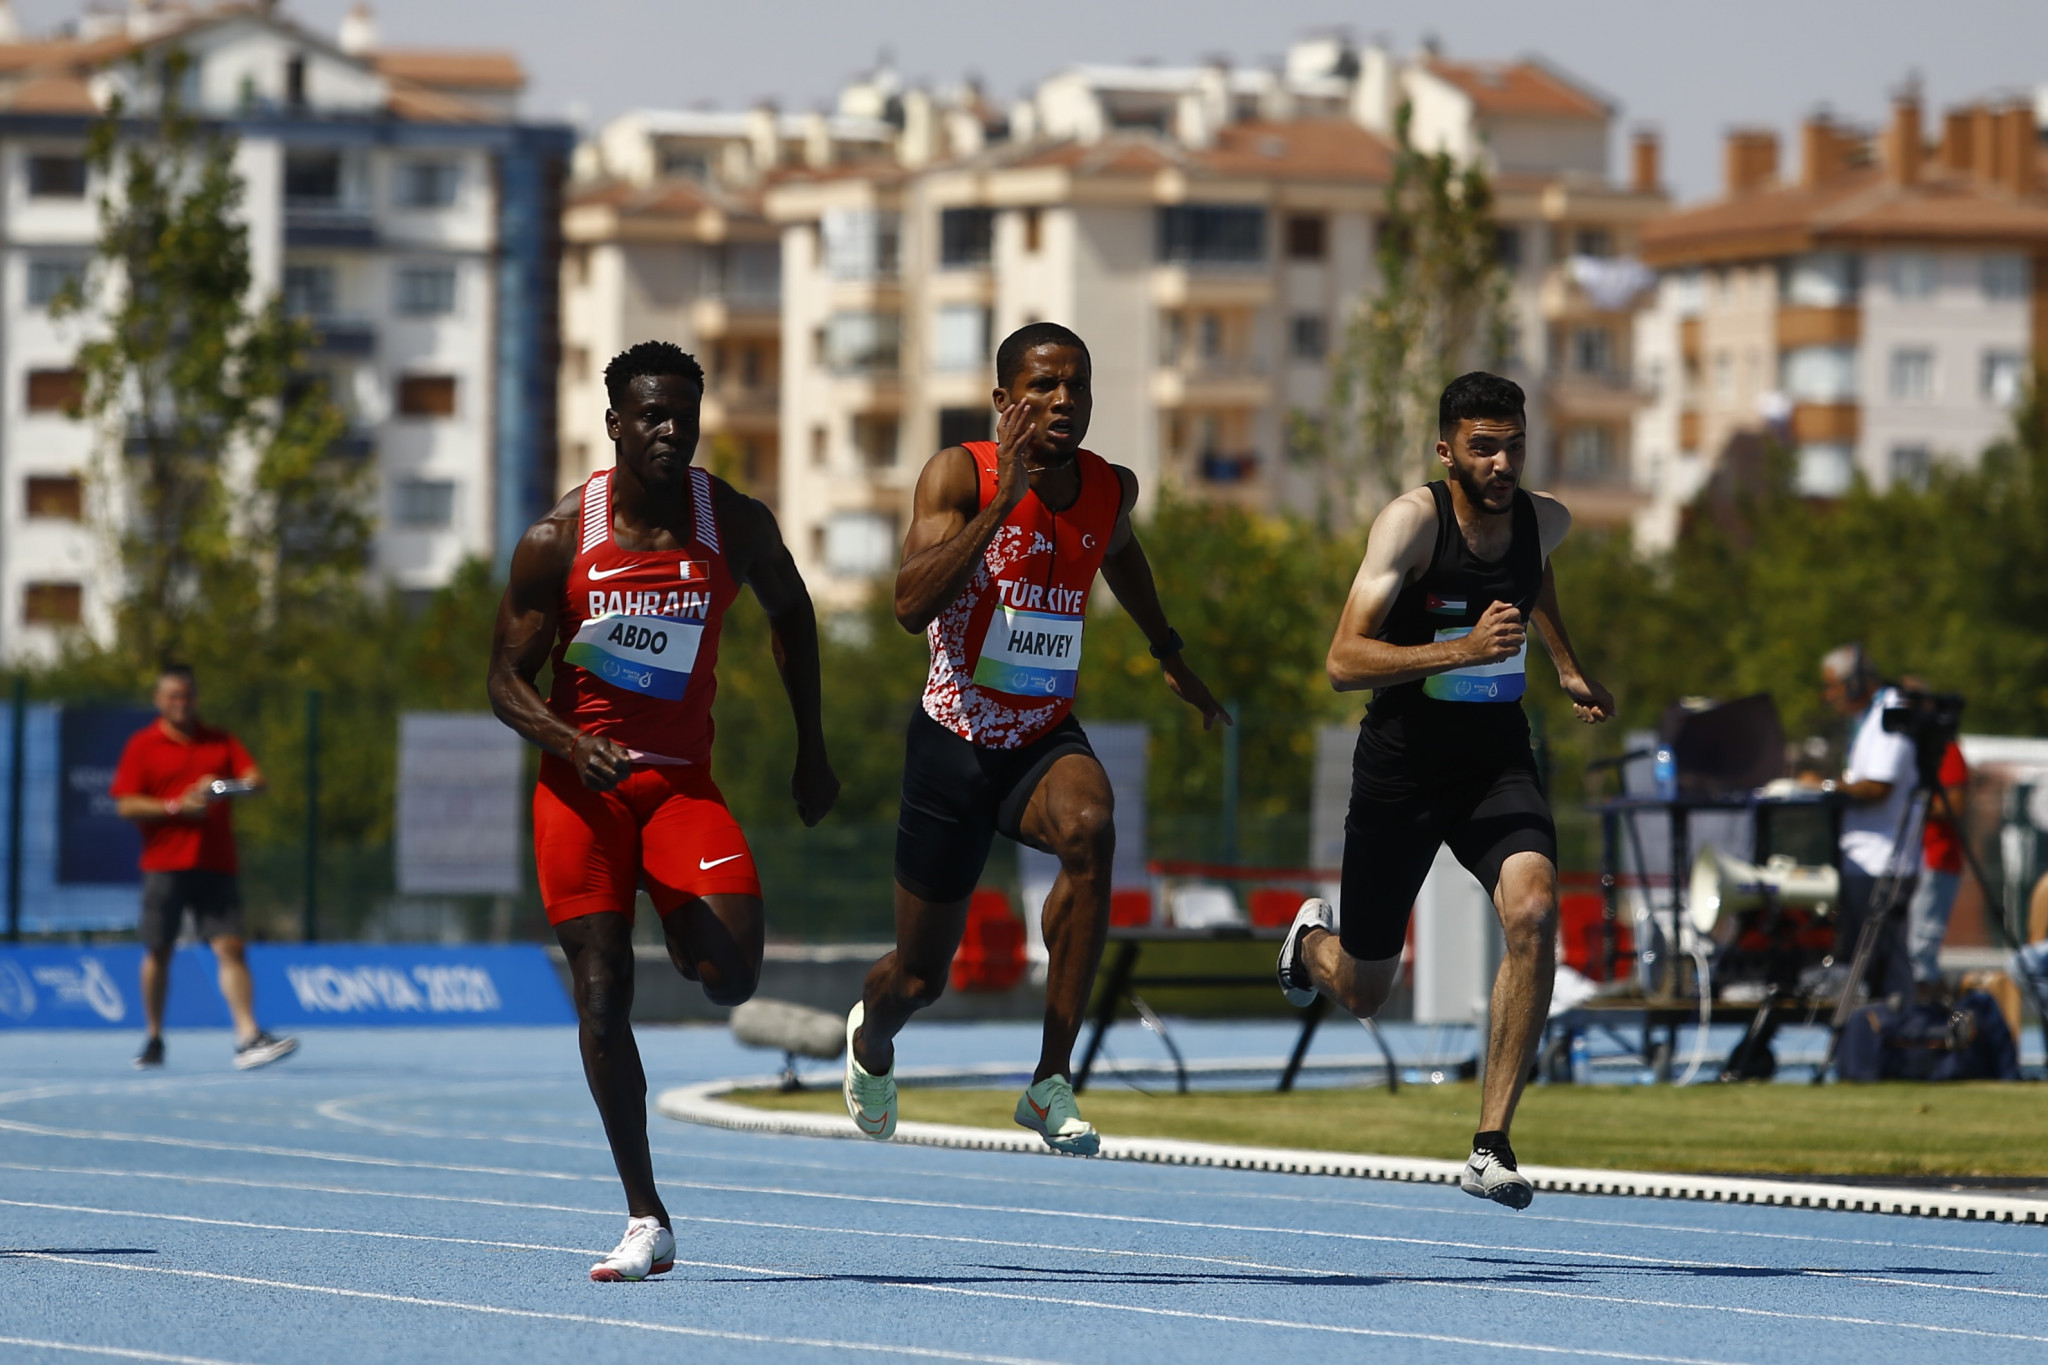 Technical delegates for athletics at Konya 2021 ruled that "it was not possible to confirm the full accuracy of the results" of sprint races in the opening three days ©Konya 2021